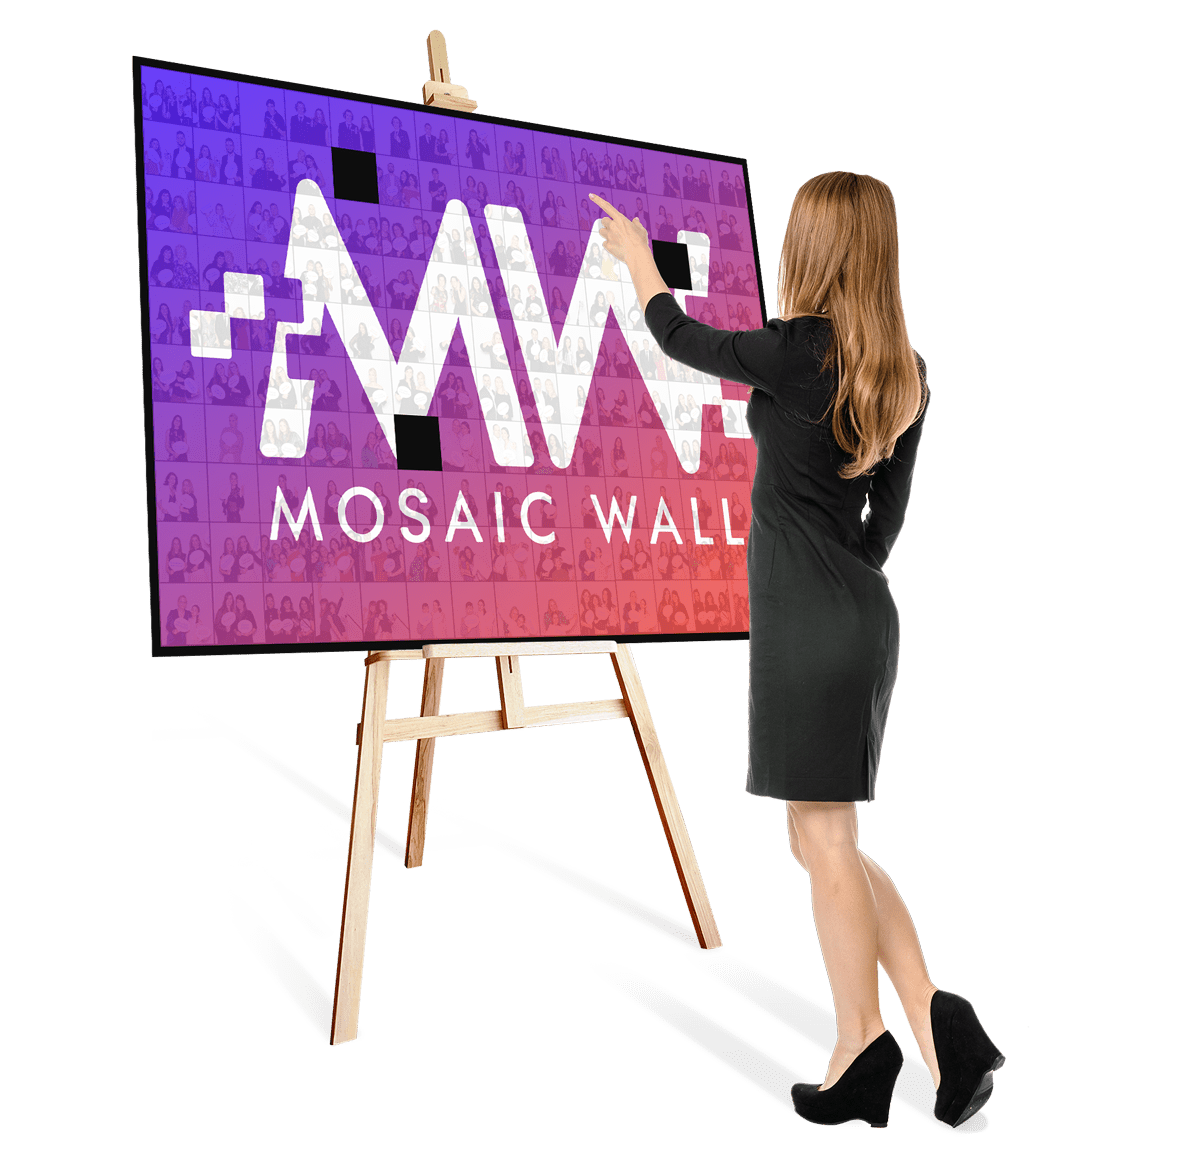 Mosaic Wall event